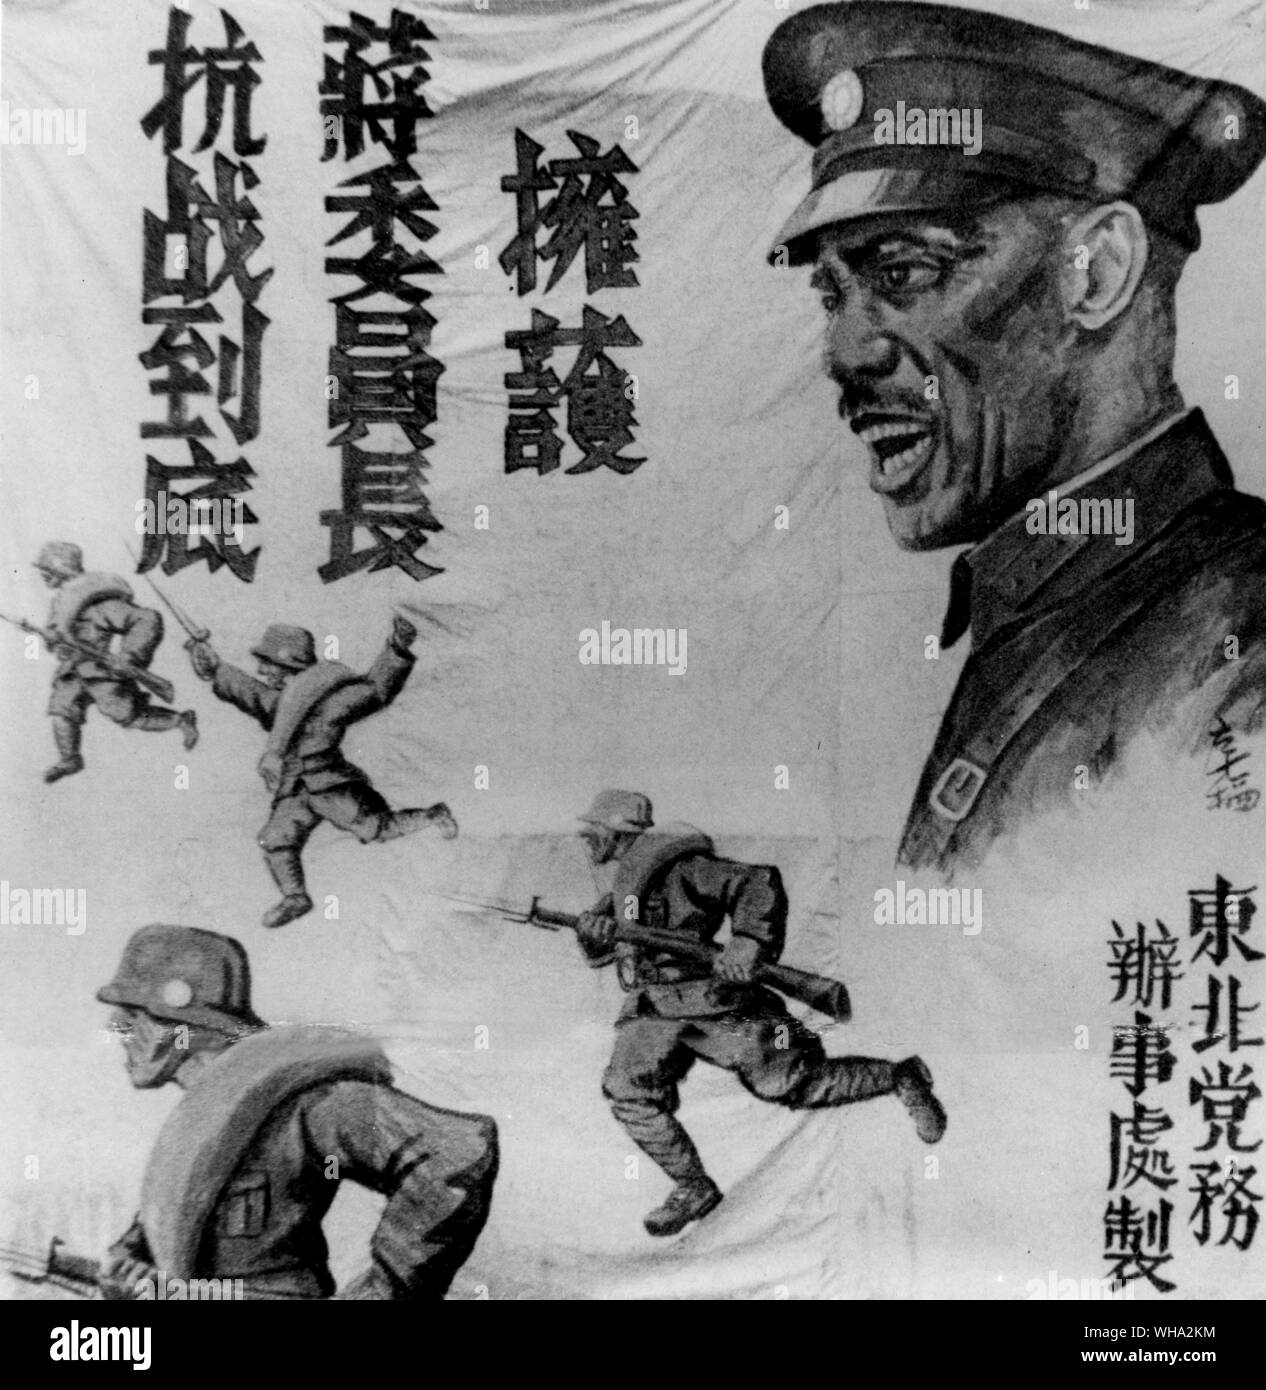 WW2: Poster art in war time China. Stock Photo